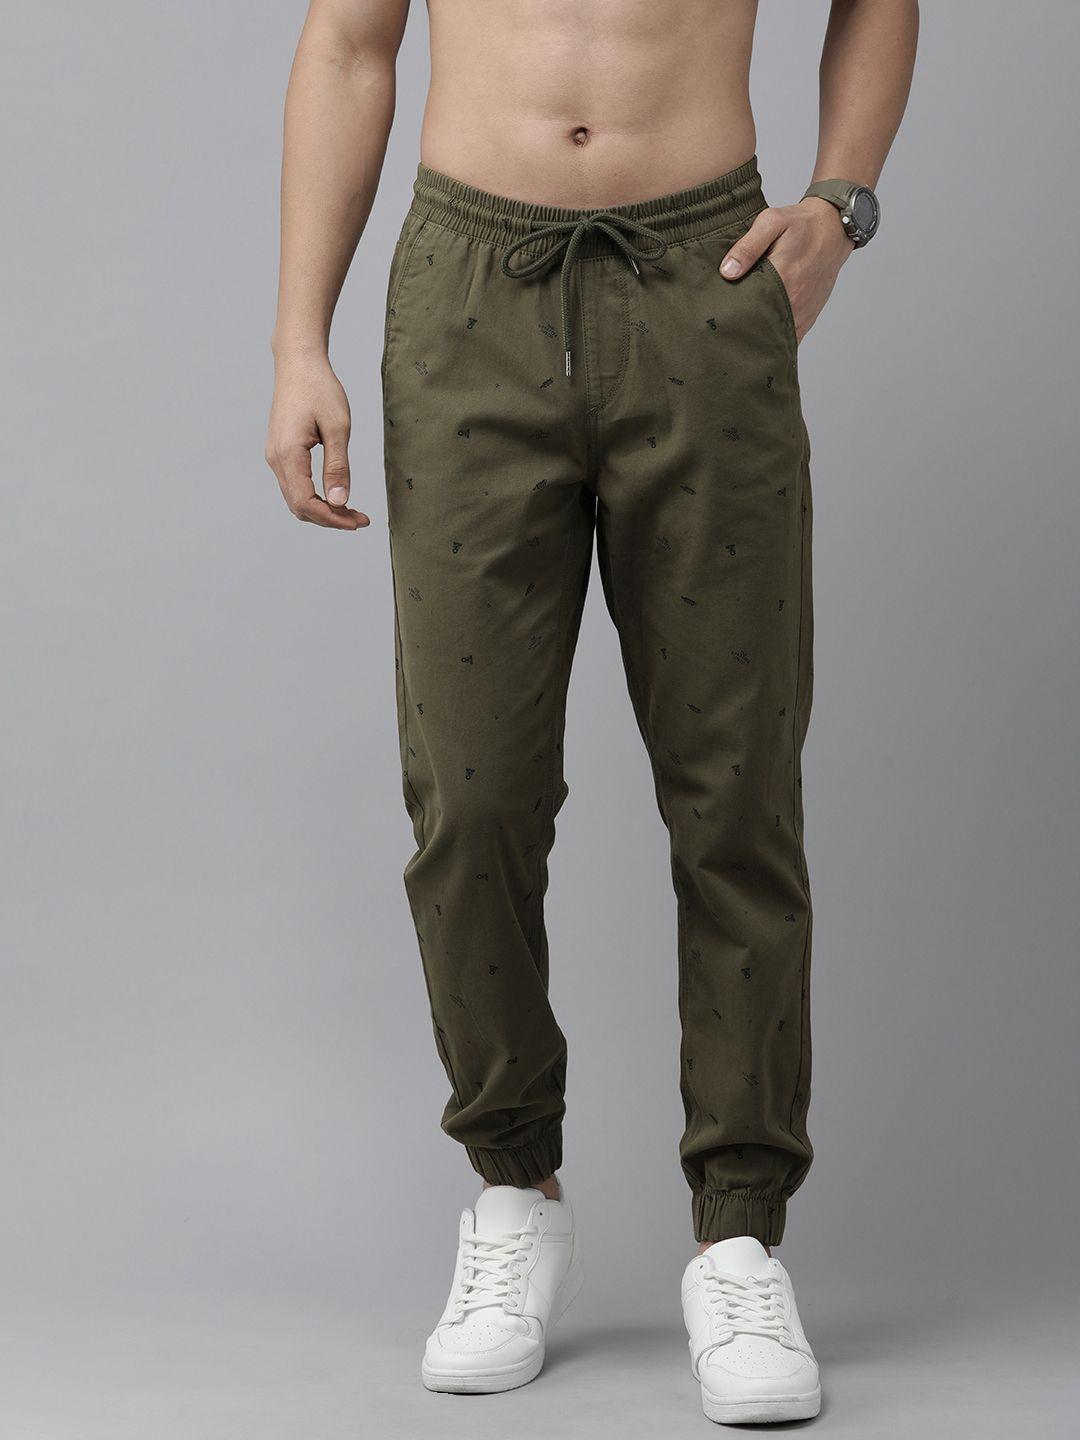 the-roadster-lifestyle-co.-men-pure-cotton-typography-printed-pleated-joggers-trousers